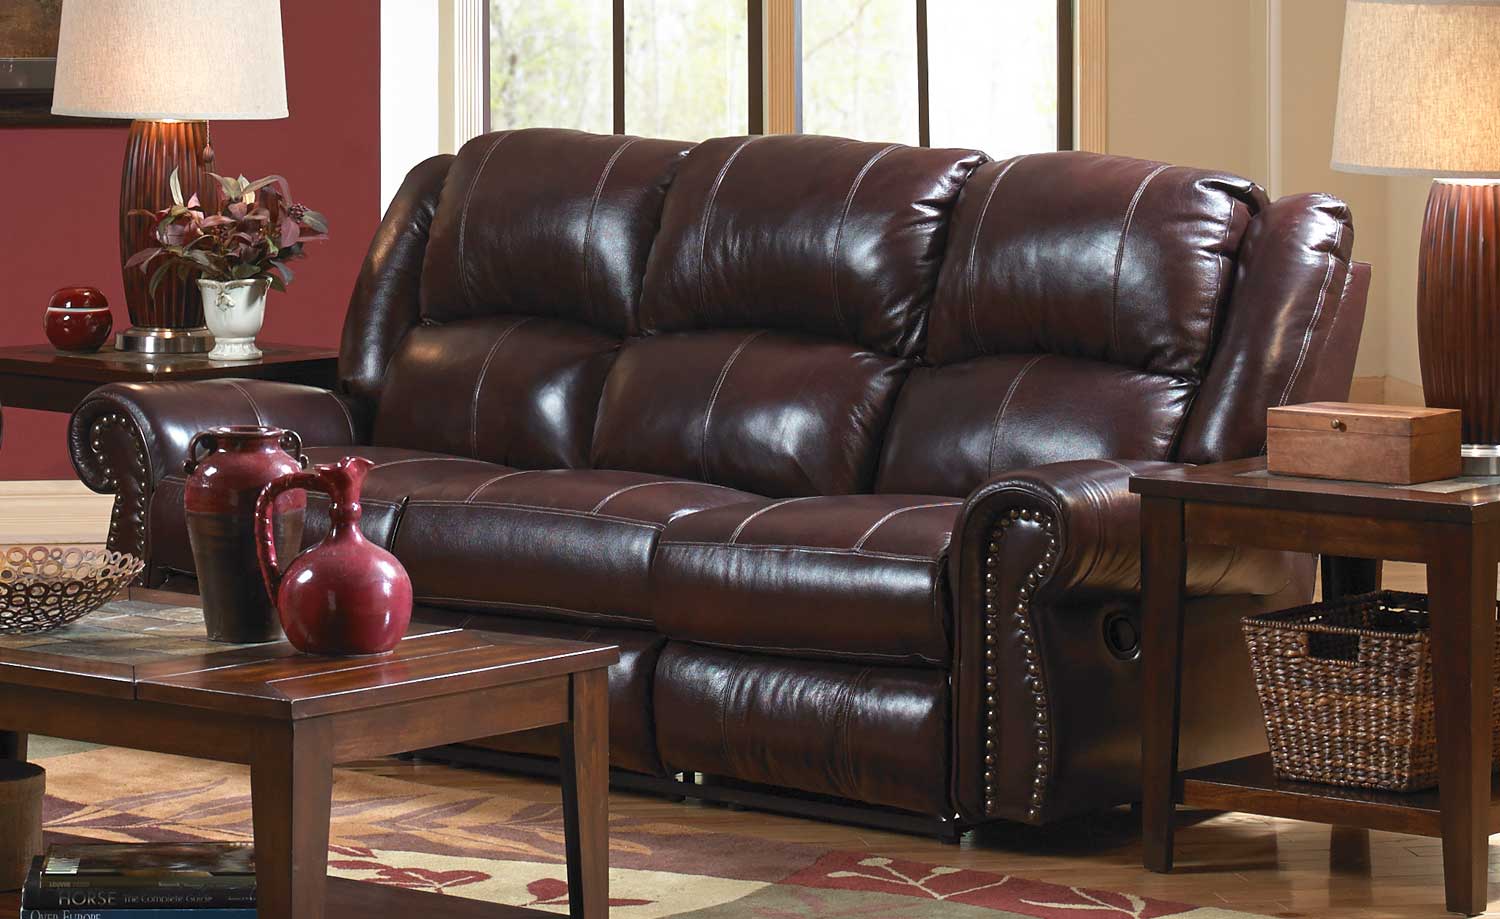 CatNapper Livingston Power Reclining Sofa with Drop Down Table - Redwood